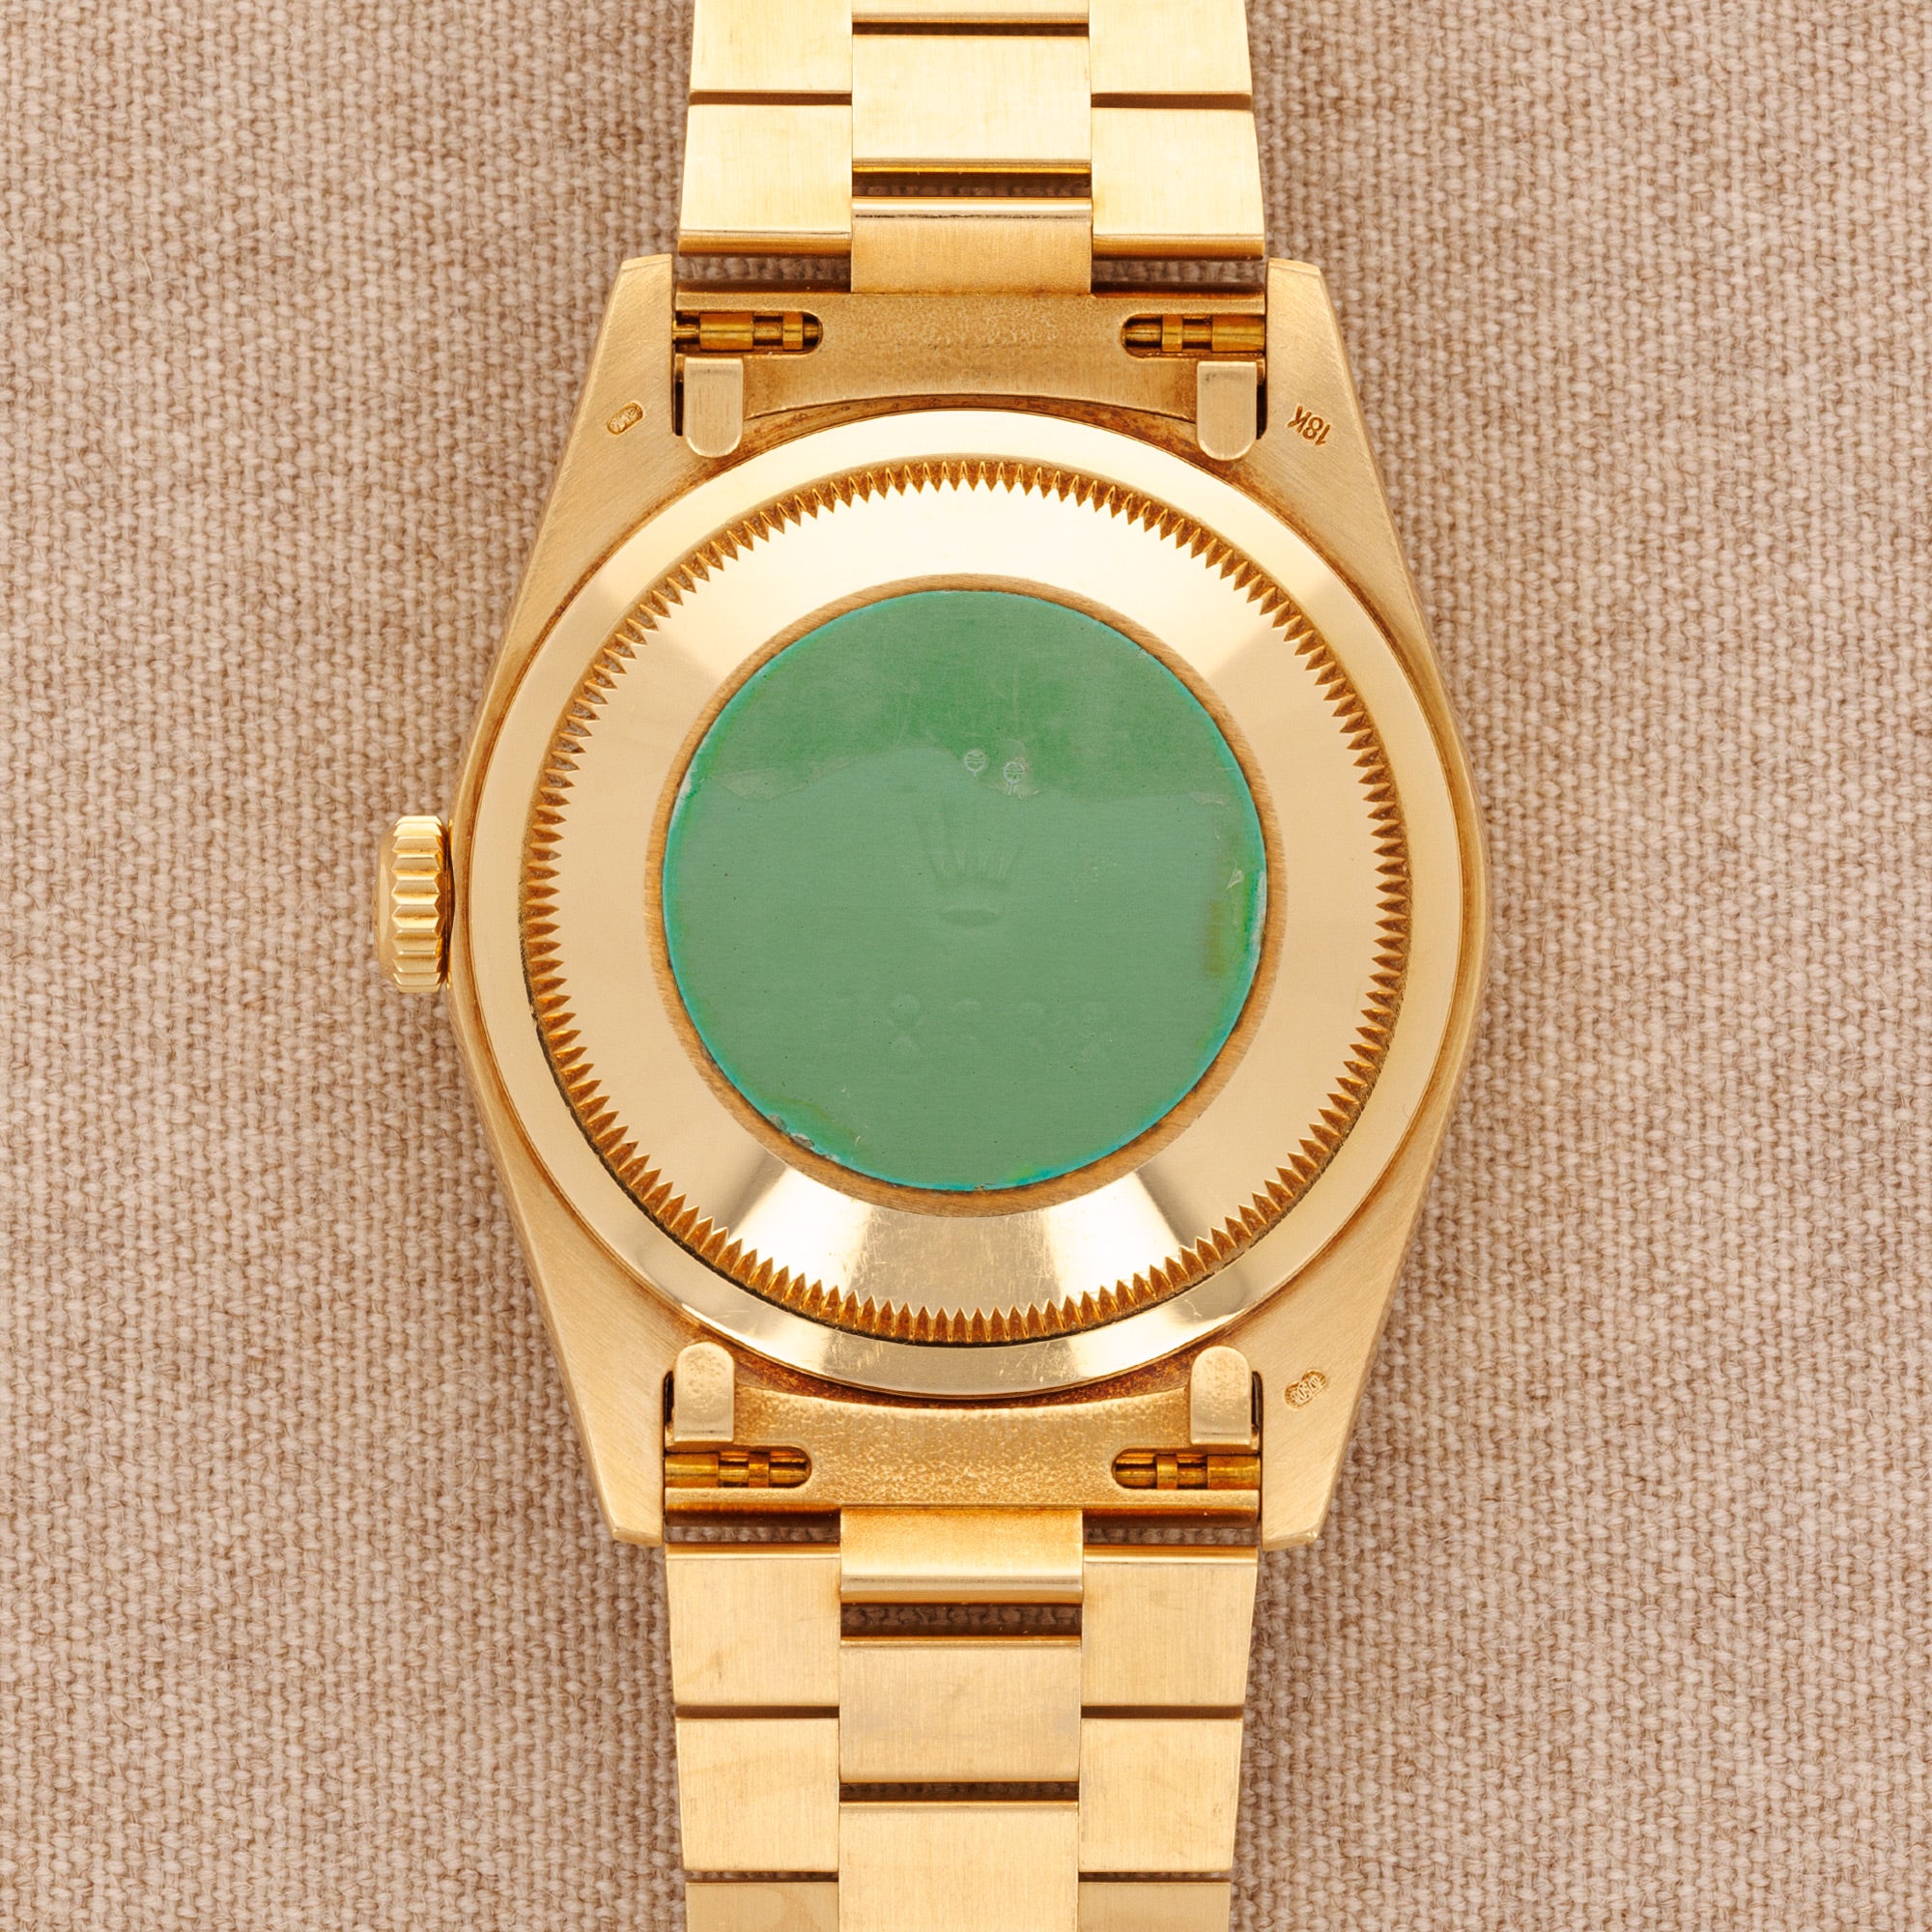 Rolex - Rolex Yellow Gold Day-Date Watch Ref. 18338 with Diamond Dial - The Keystone Watches